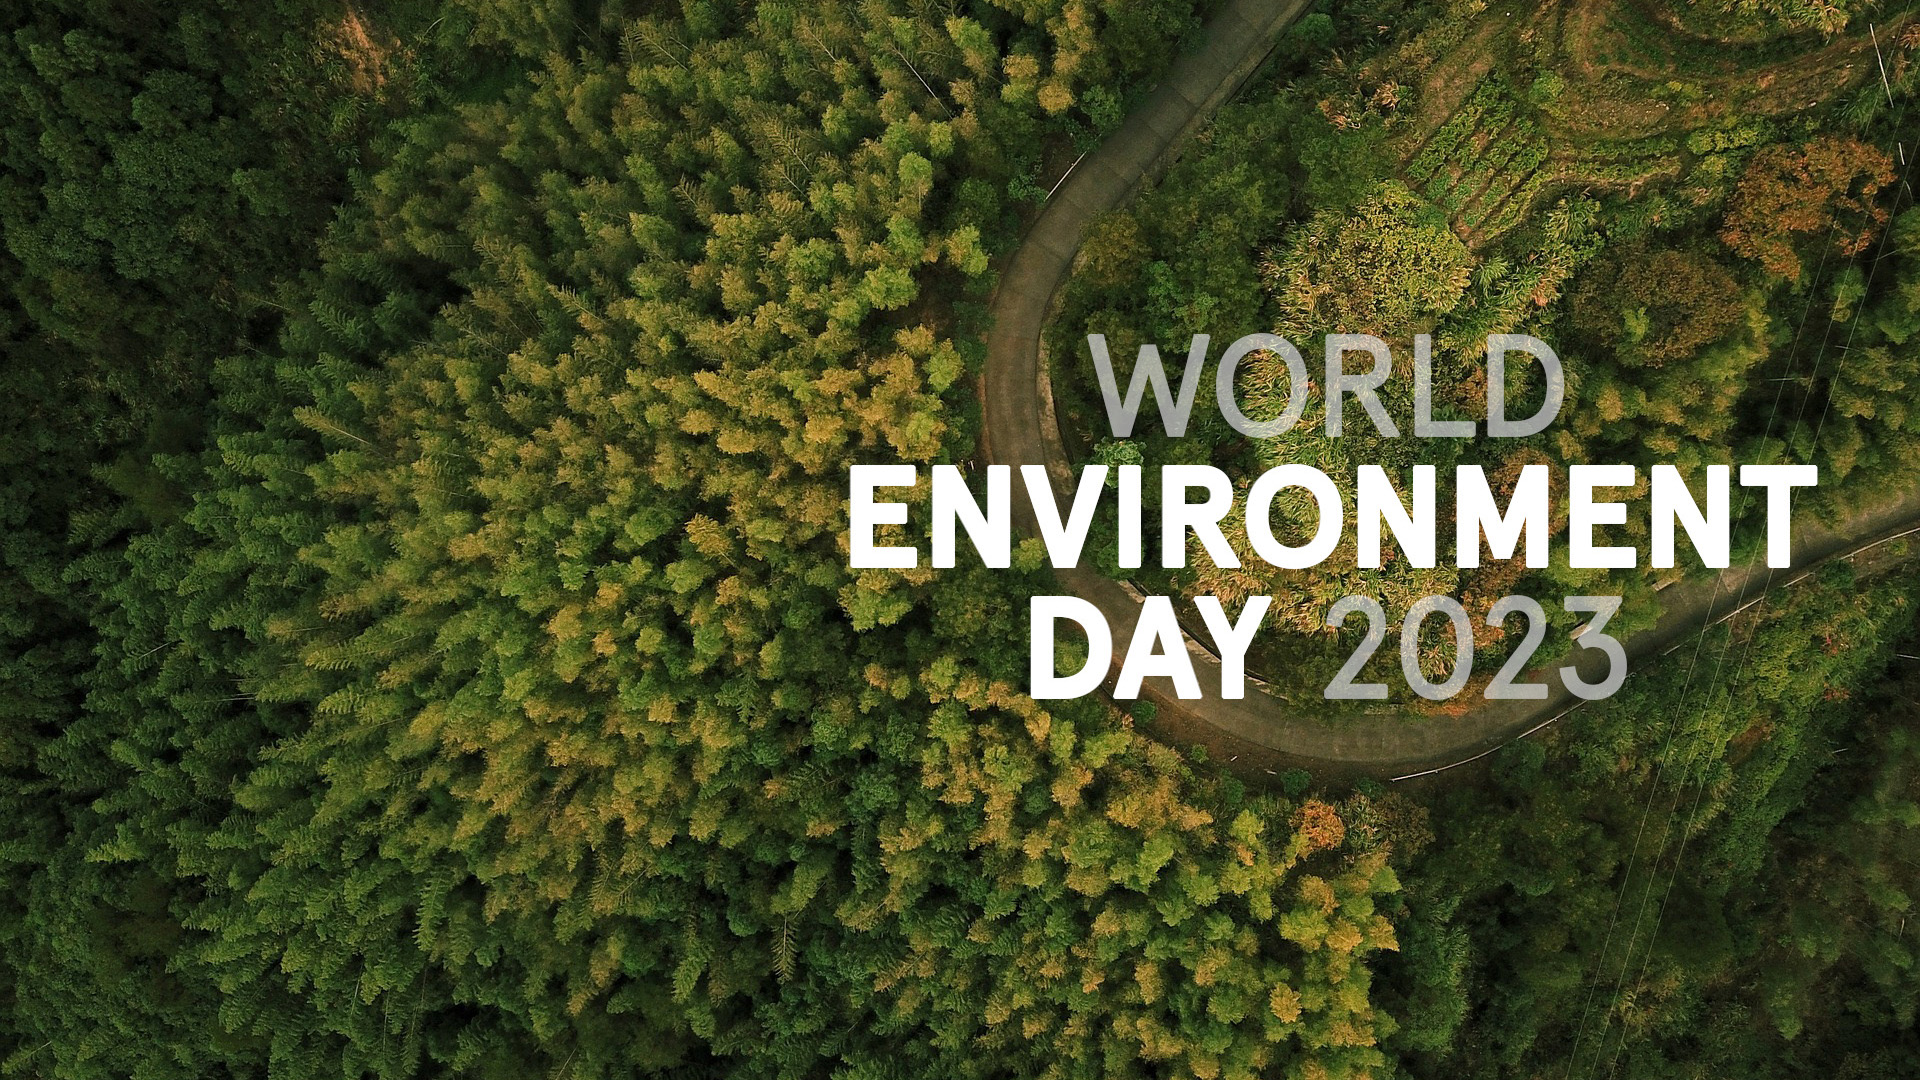 Photo taken on a drone of a forest with trees and a round curvy road. Most of the image is made up of yellow and green trees. World Environment Day 2023 is spelt out in a thick bold sans serif font.